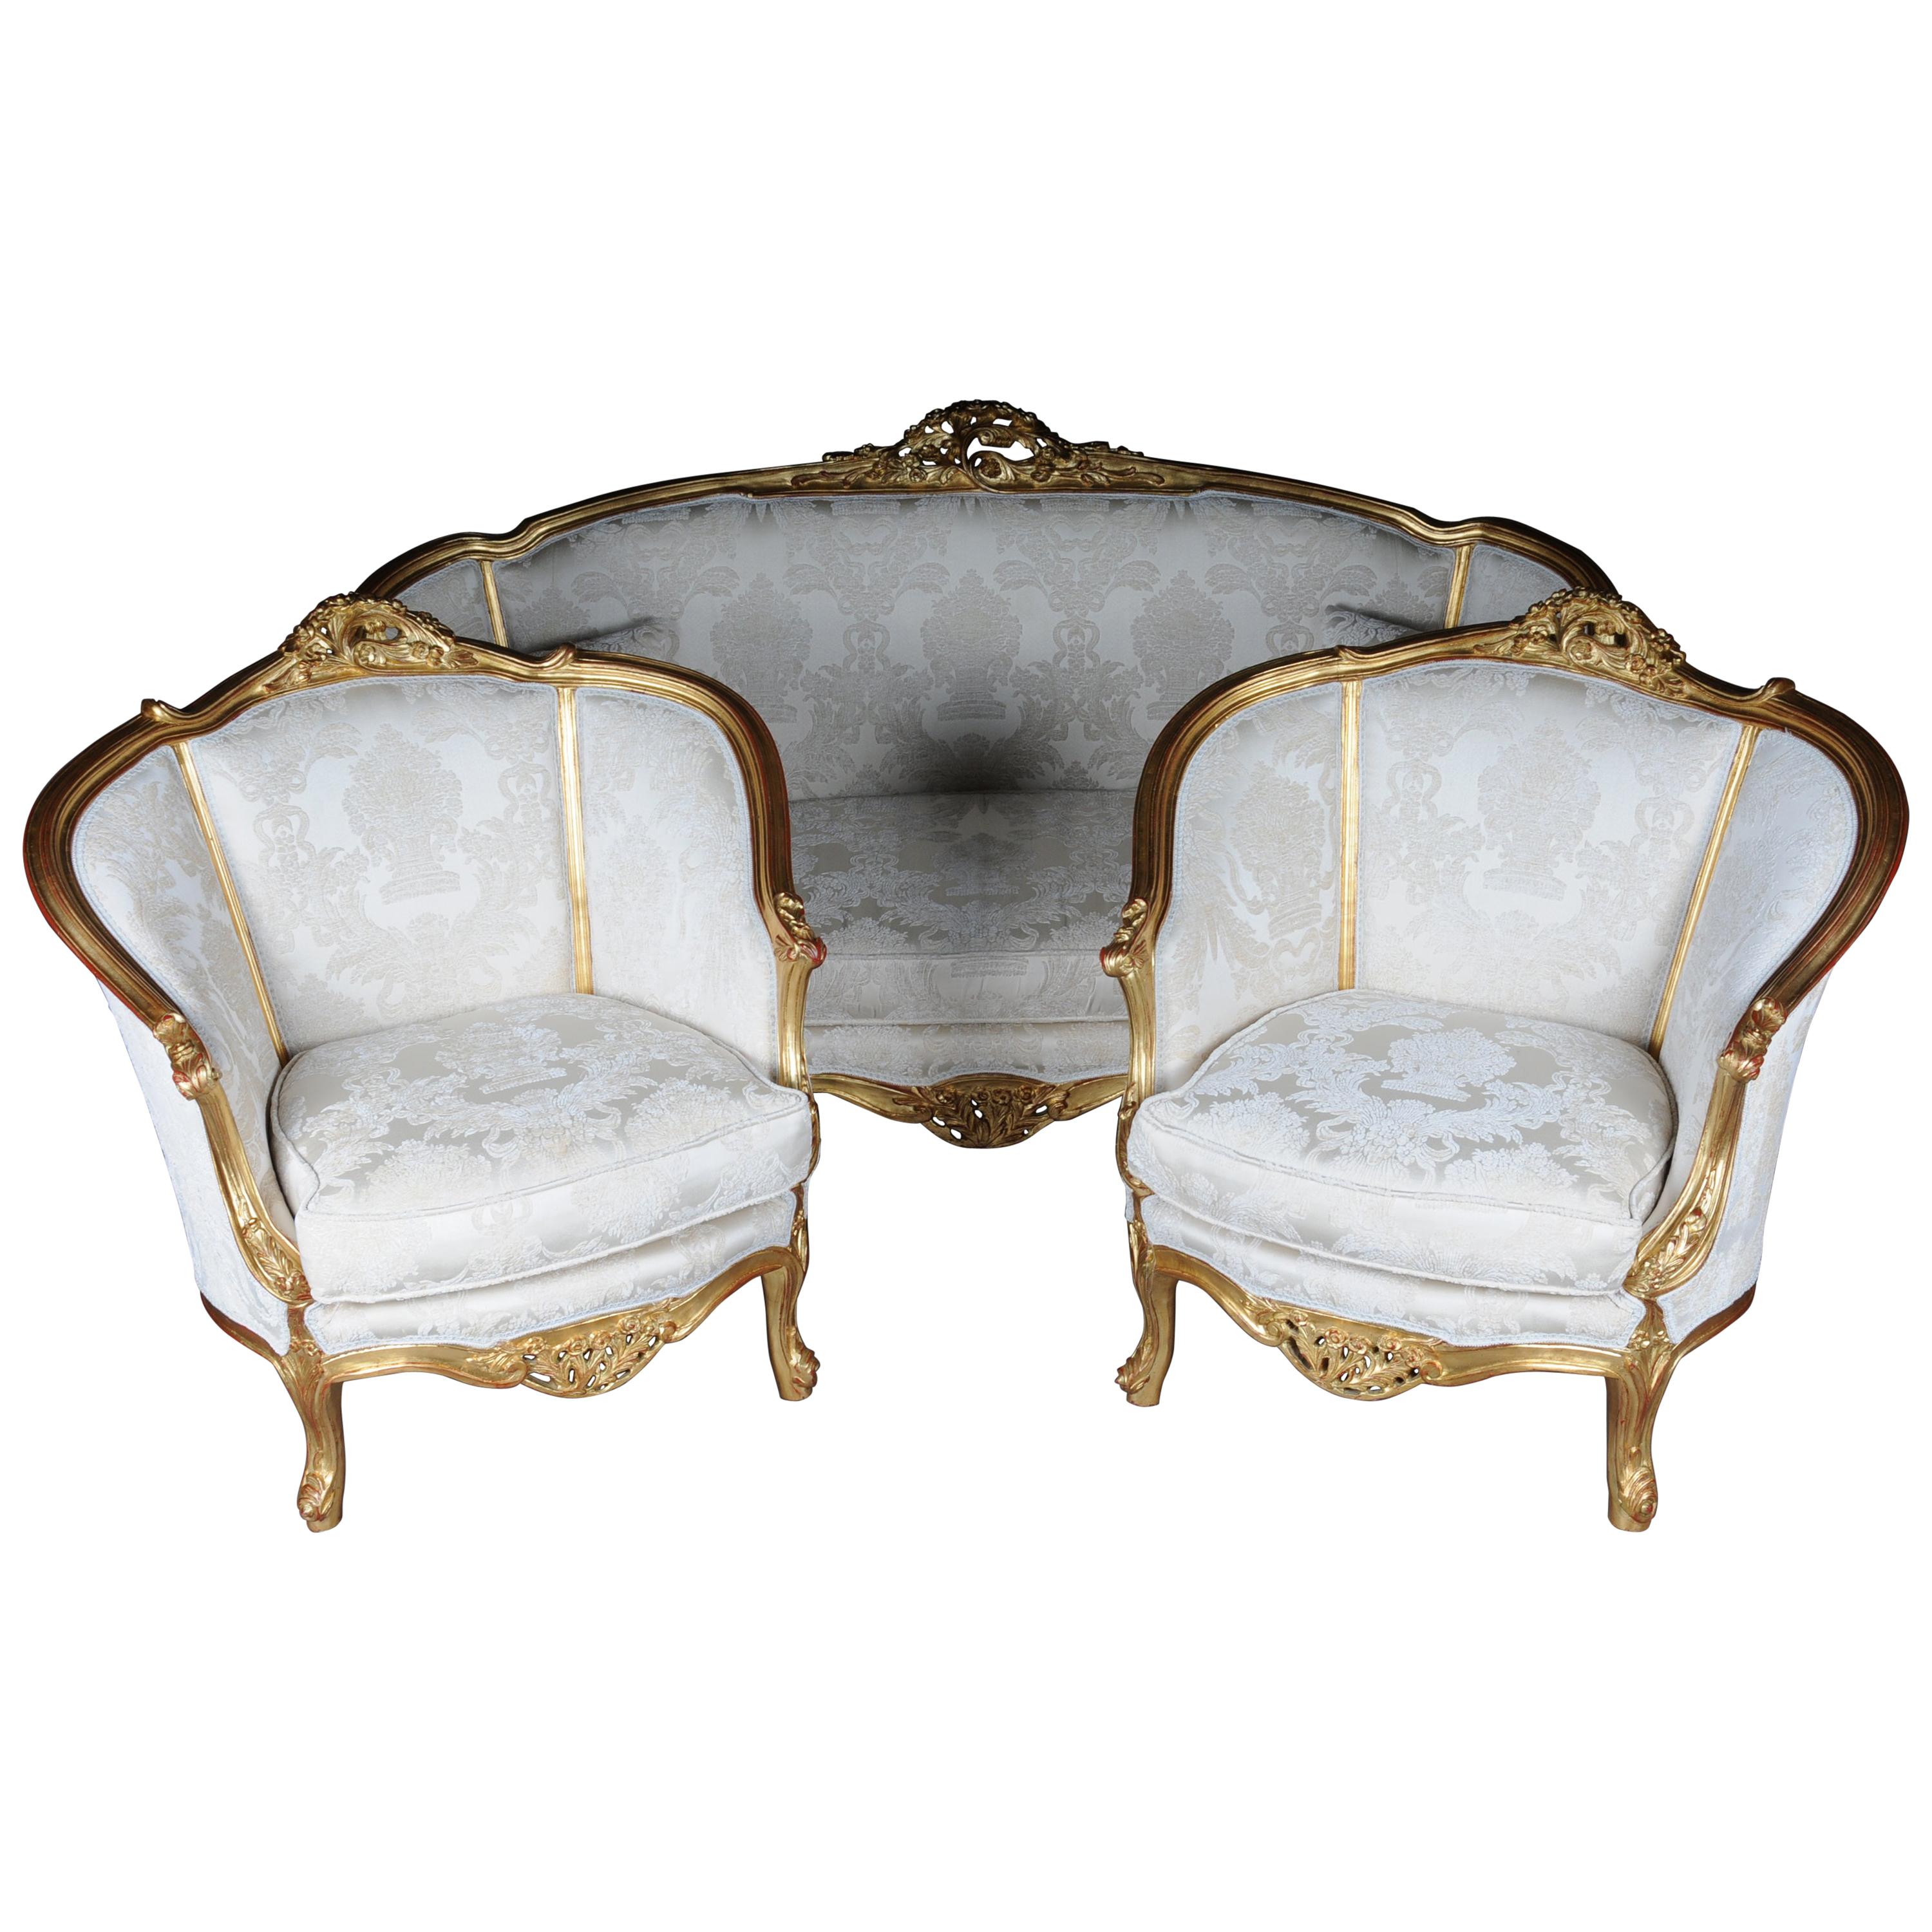 Beautiful French Salon Seating Group / Seating Set in Louis XV Style, 20th Centu